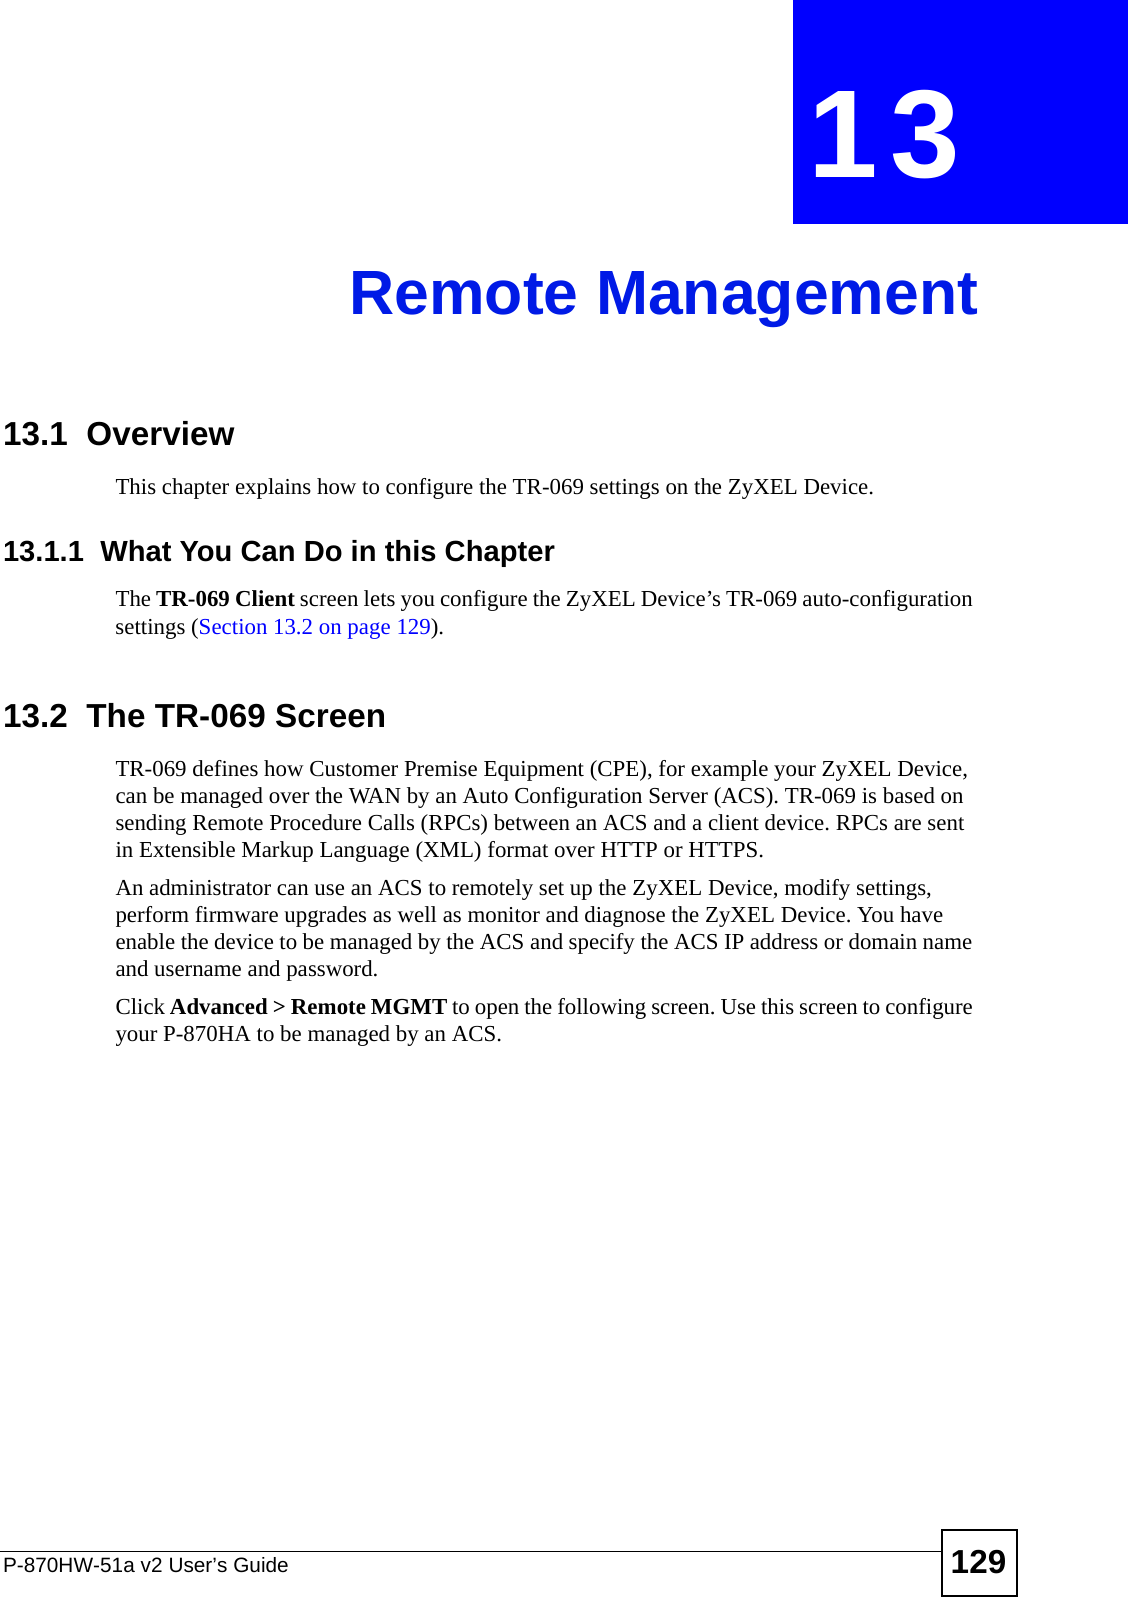 P-870HW-51a v2 User’s Guide 129CHAPTER  13 Remote Management13.1  OverviewThis chapter explains how to configure the TR-069 settings on the ZyXEL Device.13.1.1  What You Can Do in this ChapterThe TR-069 Client screen lets you configure the ZyXEL Device’s TR-069 auto-configuration settings (Section 13.2 on page 129).13.2  The TR-069 ScreenTR-069 defines how Customer Premise Equipment (CPE), for example your ZyXEL Device, can be managed over the WAN by an Auto Configuration Server (ACS). TR-069 is based on sending Remote Procedure Calls (RPCs) between an ACS and a client device. RPCs are sent in Extensible Markup Language (XML) format over HTTP or HTTPS. An administrator can use an ACS to remotely set up the ZyXEL Device, modify settings, perform firmware upgrades as well as monitor and diagnose the ZyXEL Device. You have enable the device to be managed by the ACS and specify the ACS IP address or domain name and username and password.Click Advanced &gt; Remote MGMT to open the following screen. Use this screen to configure your P-870HA to be managed by an ACS. 